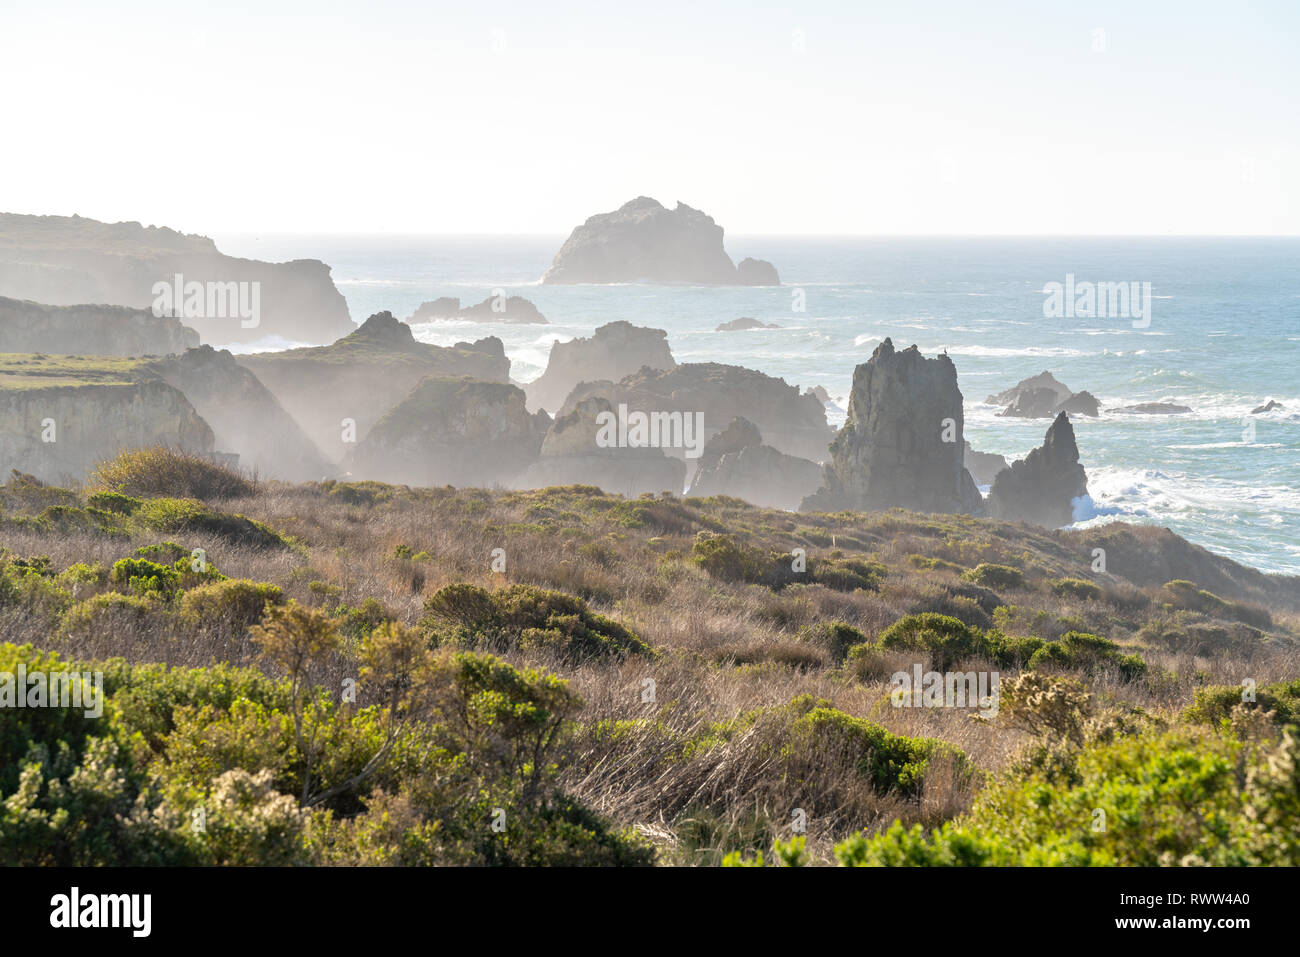 Big Sur, California - Many layers of sea stacks and rugged coastline along the west coast of the United States and the famous Highway One. Stock Photo